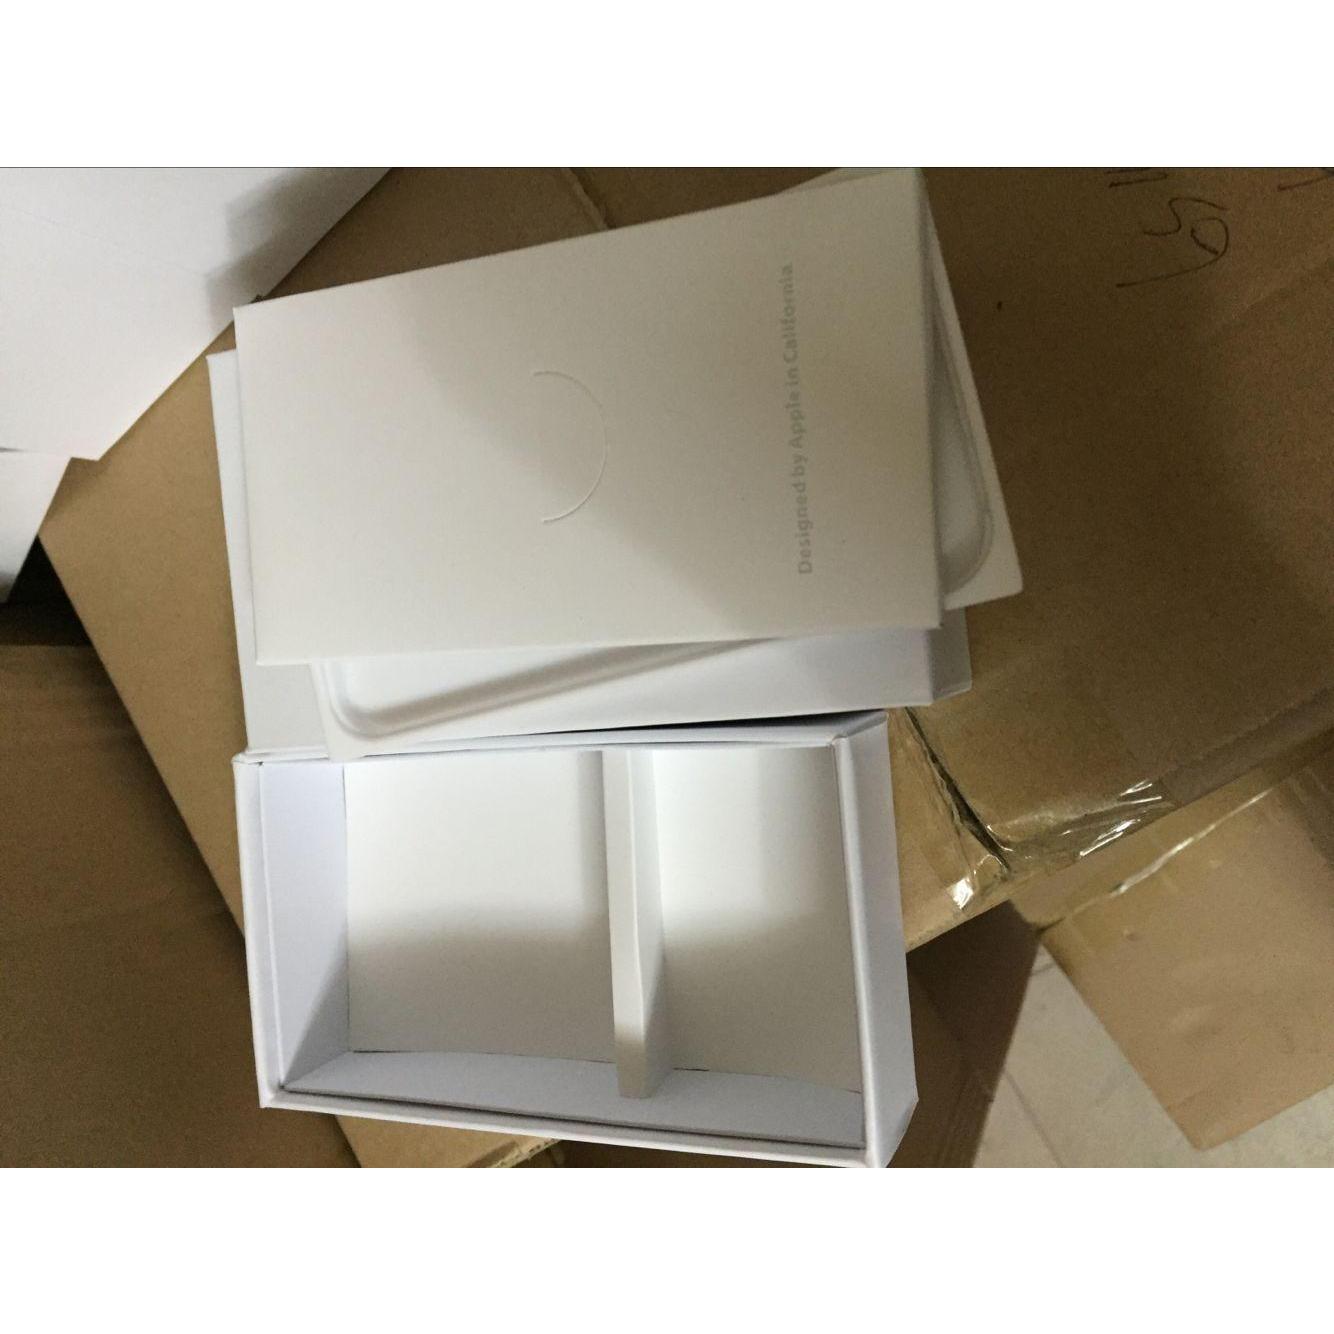 Apple iphoe 4/4s WHITE BOX Wholesale Suppliers